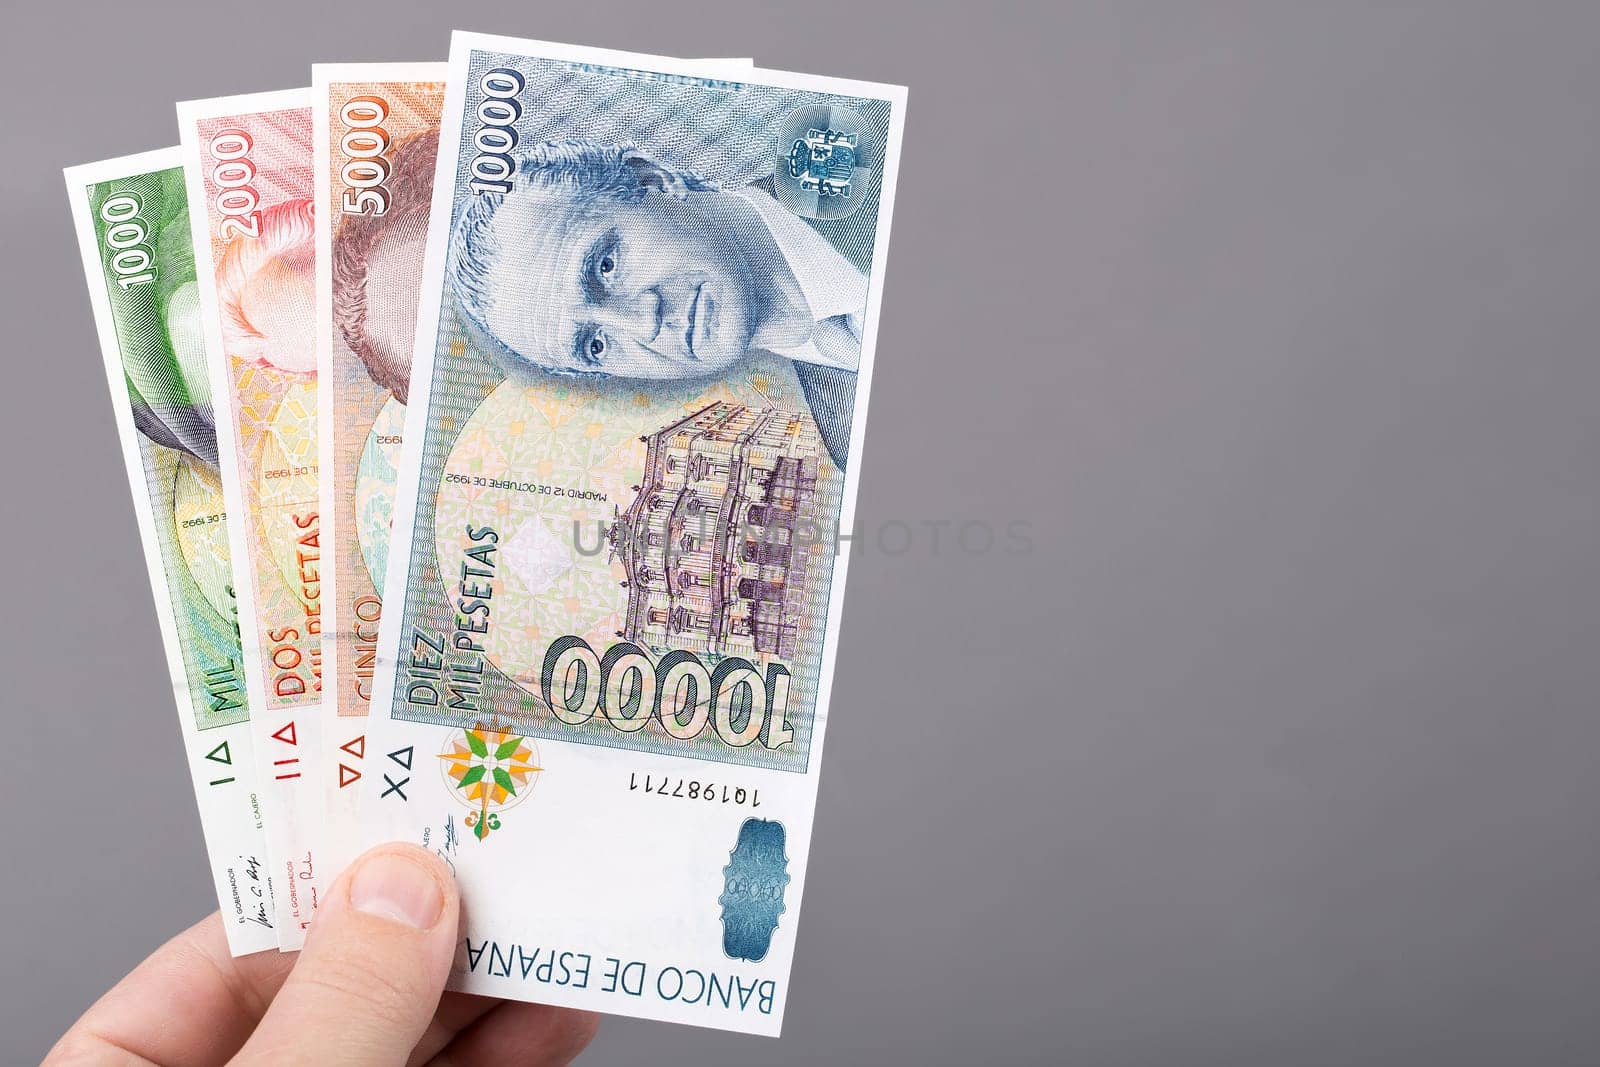 Spanish money - Peseta in the hand on a gray background